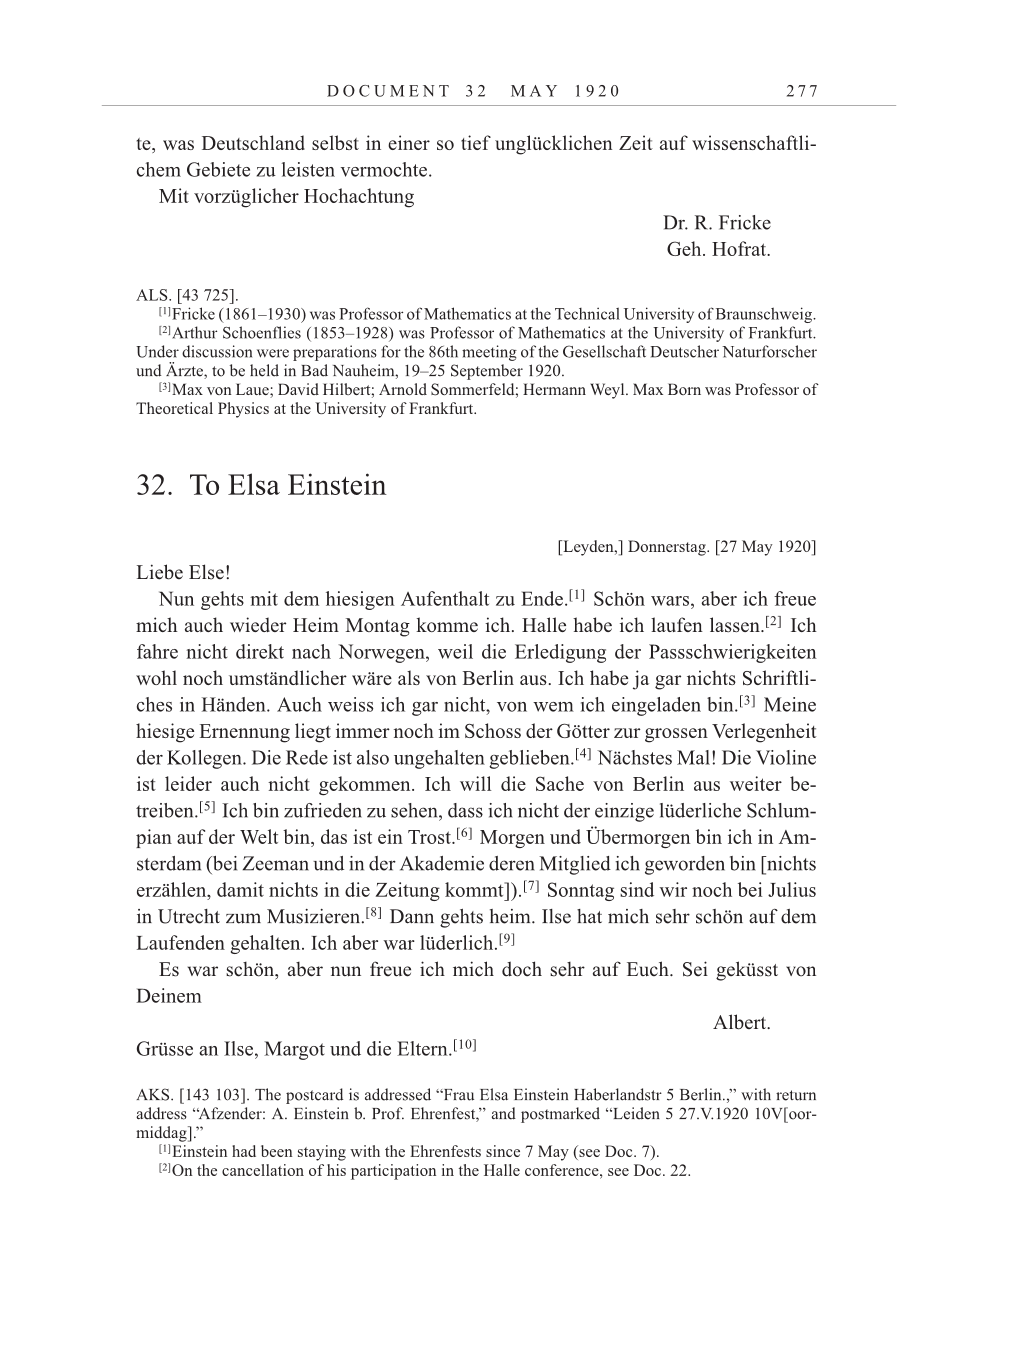 Volume 10: The Berlin Years: Correspondence May-December 1920 / Supplementary Correspondence 1909-1920 page 277